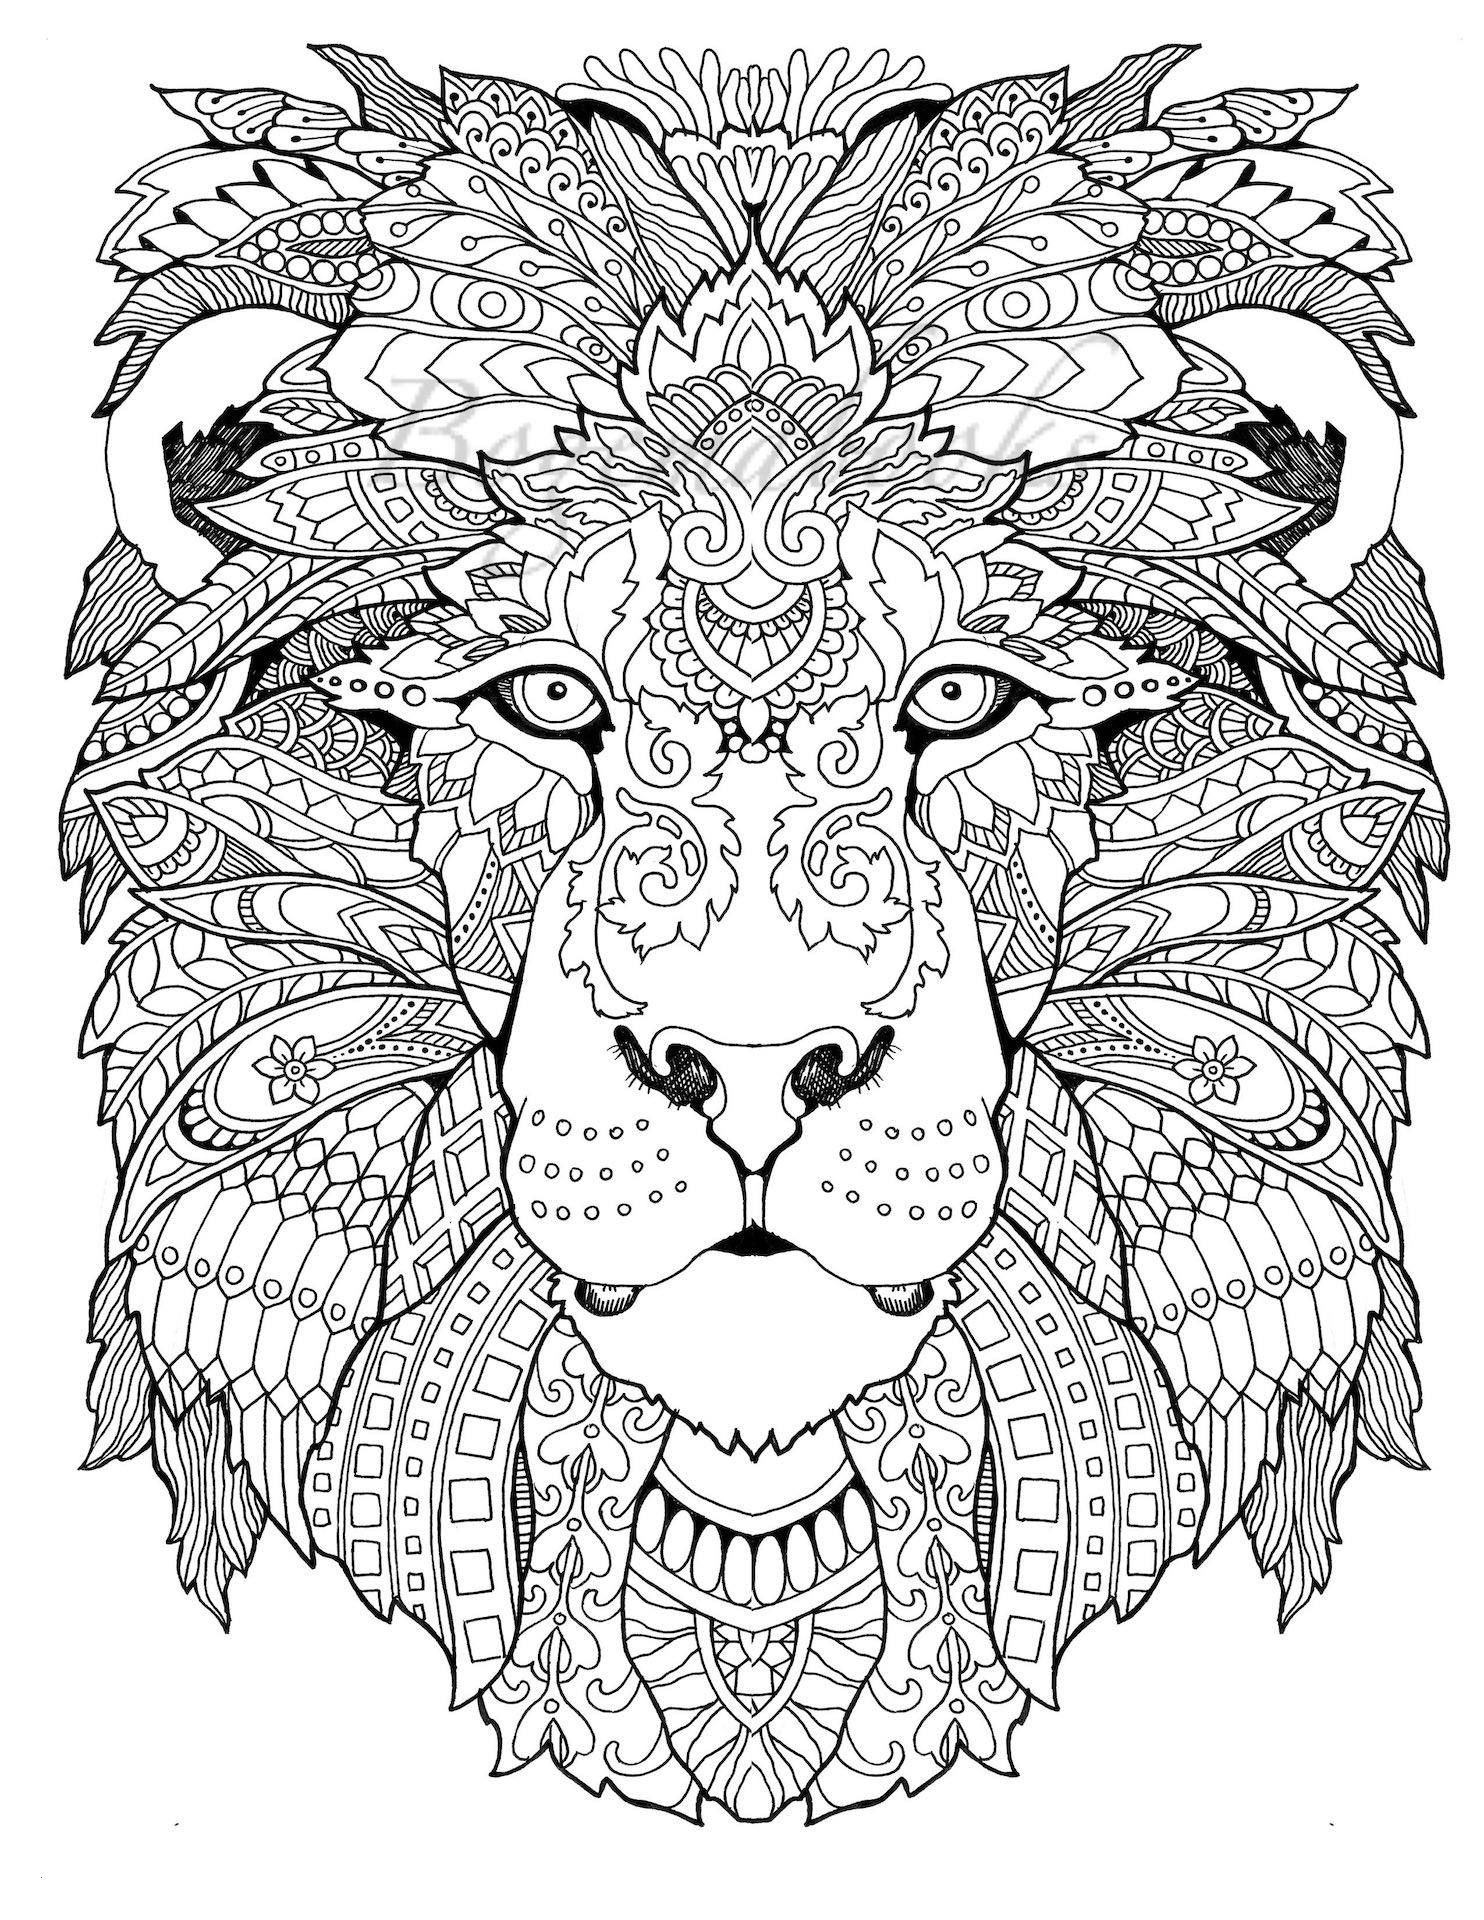 Wild Animal Coloring Page Awesome Awesome Animals Adult Coloring Book Coloring Pages Pdf Coloring